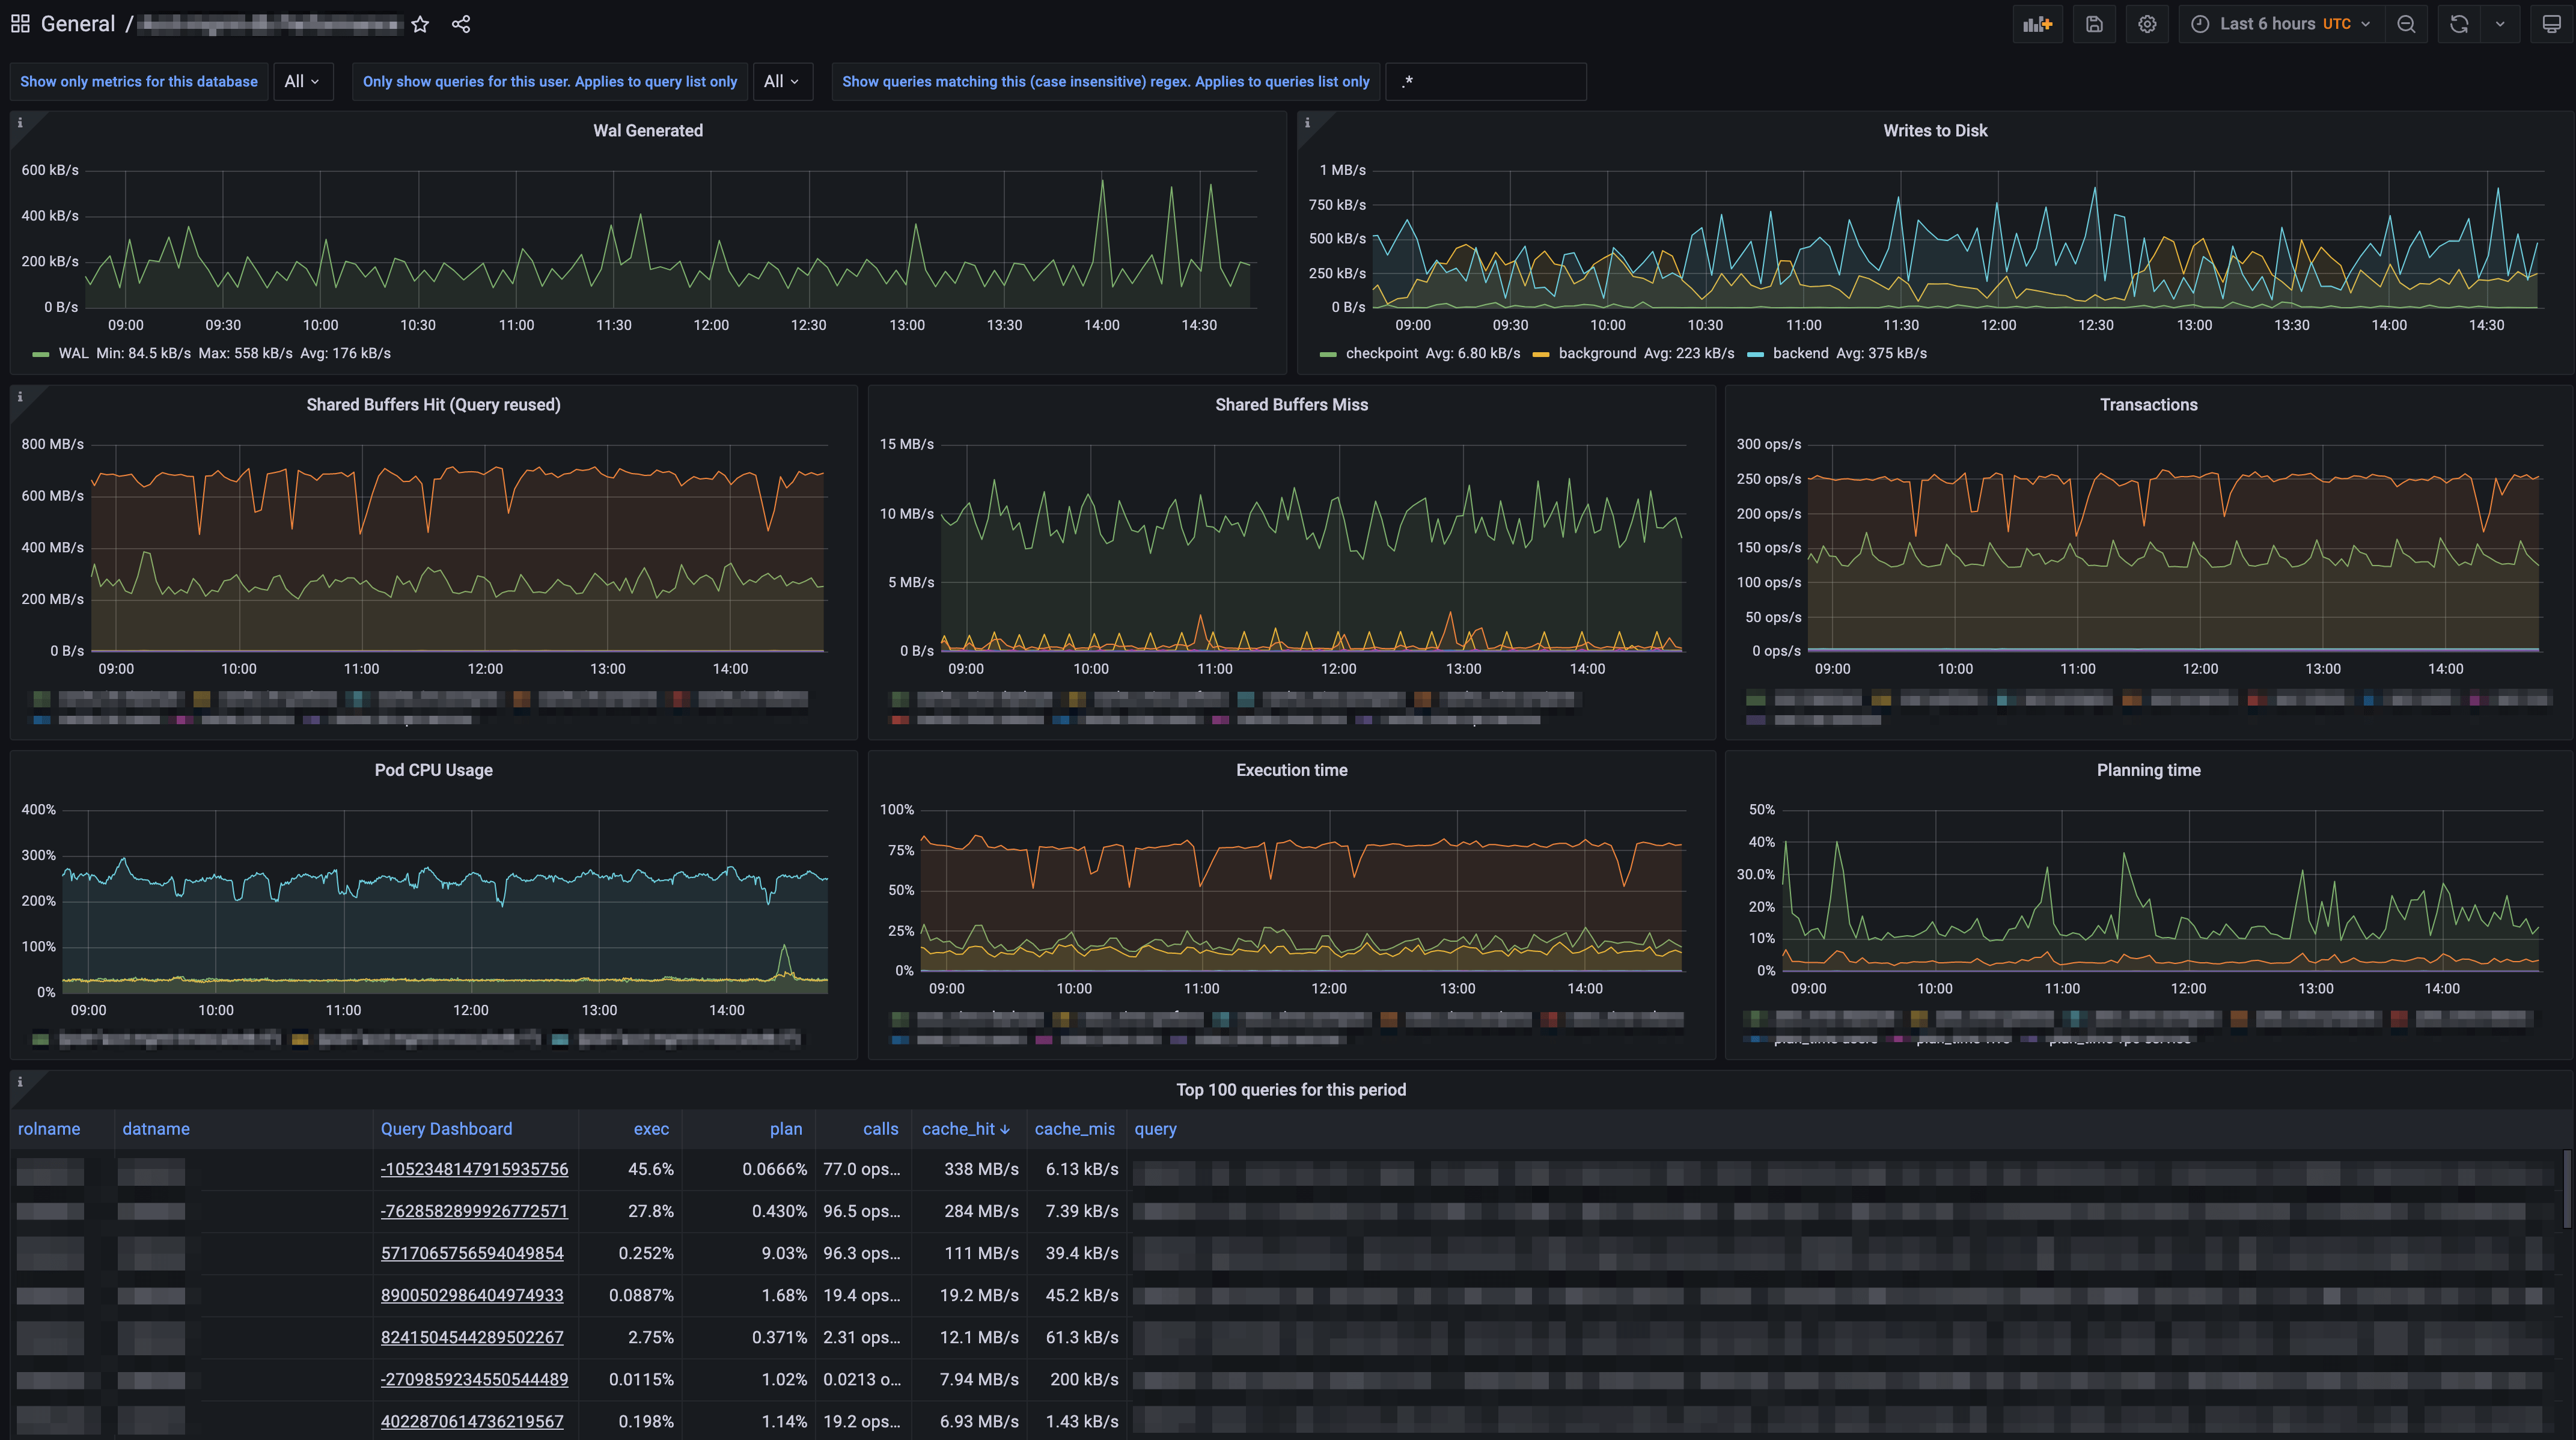 https://www.timescale.com/blog/content/images/2022/05/PIT-PostgreSQL-Database-Query-Monitoring--1-.png